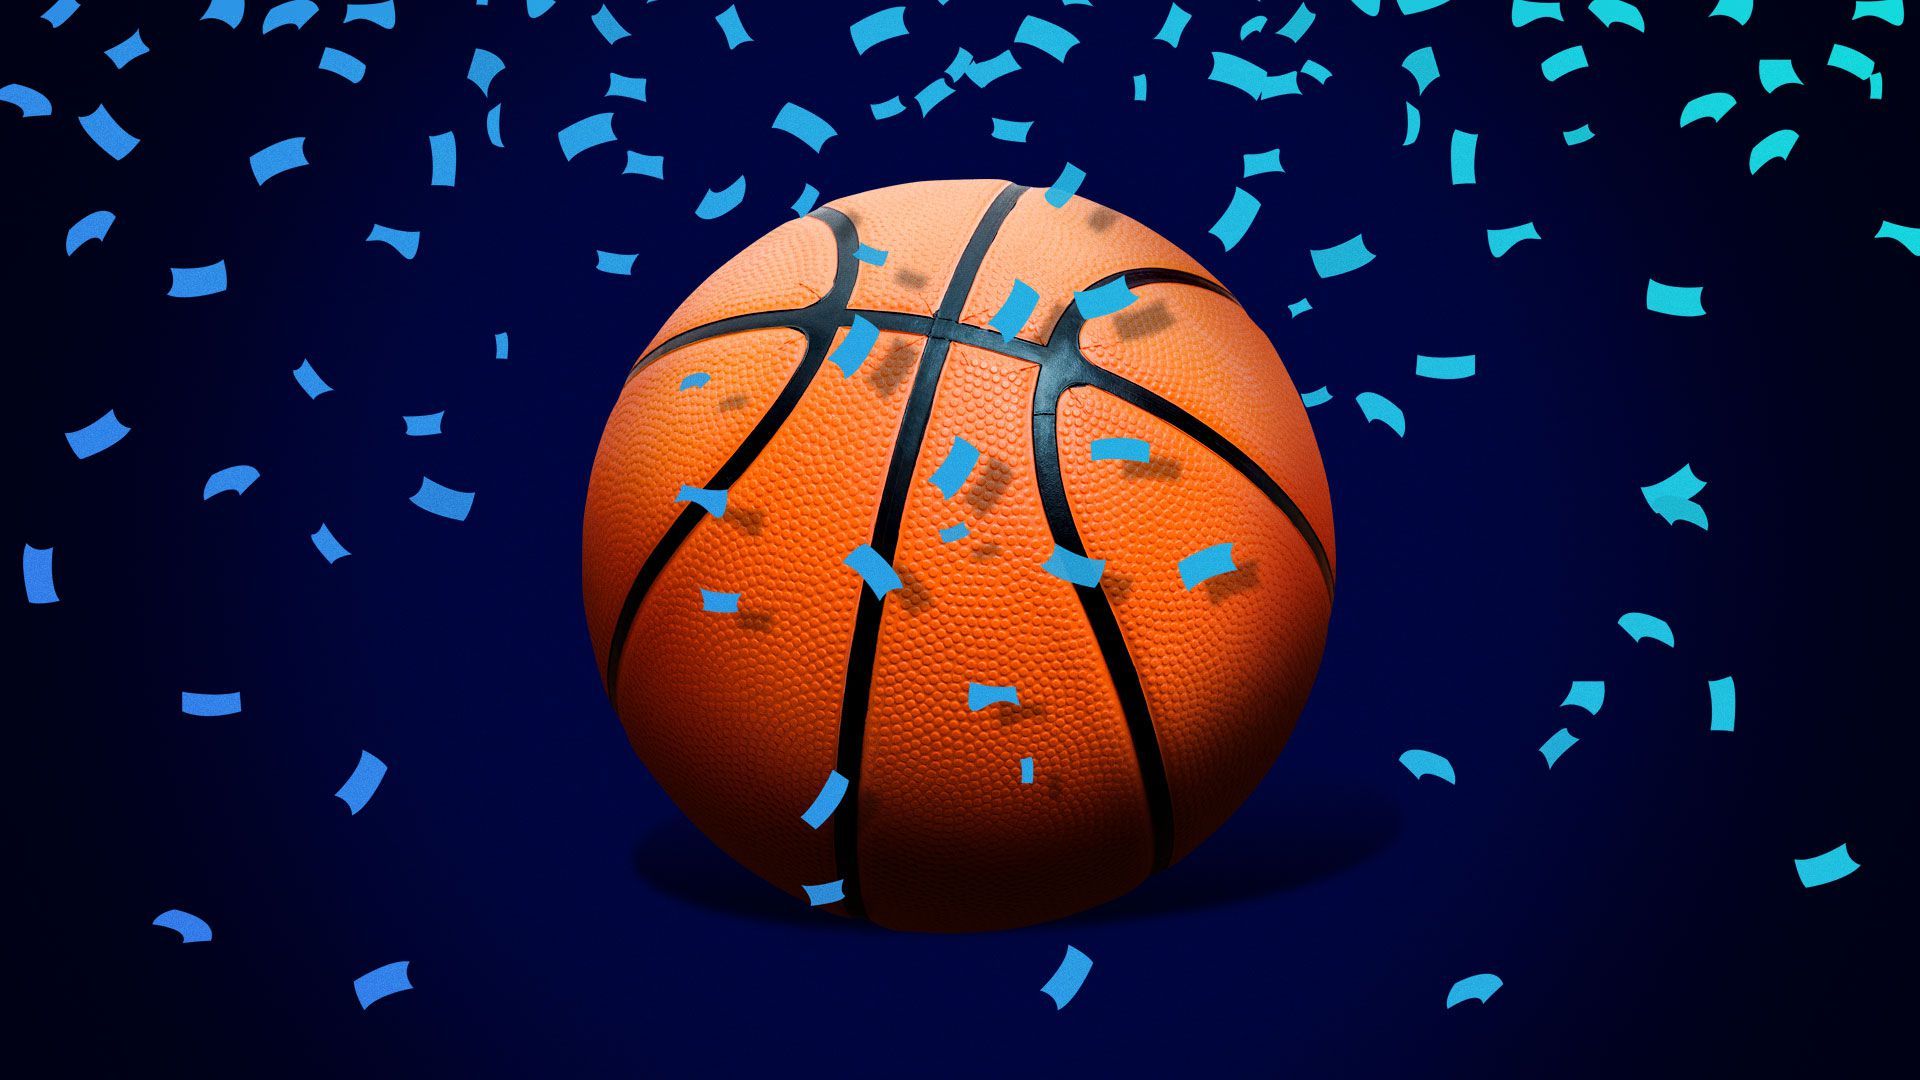 Illustration of a basketball surrounded by falling confetti